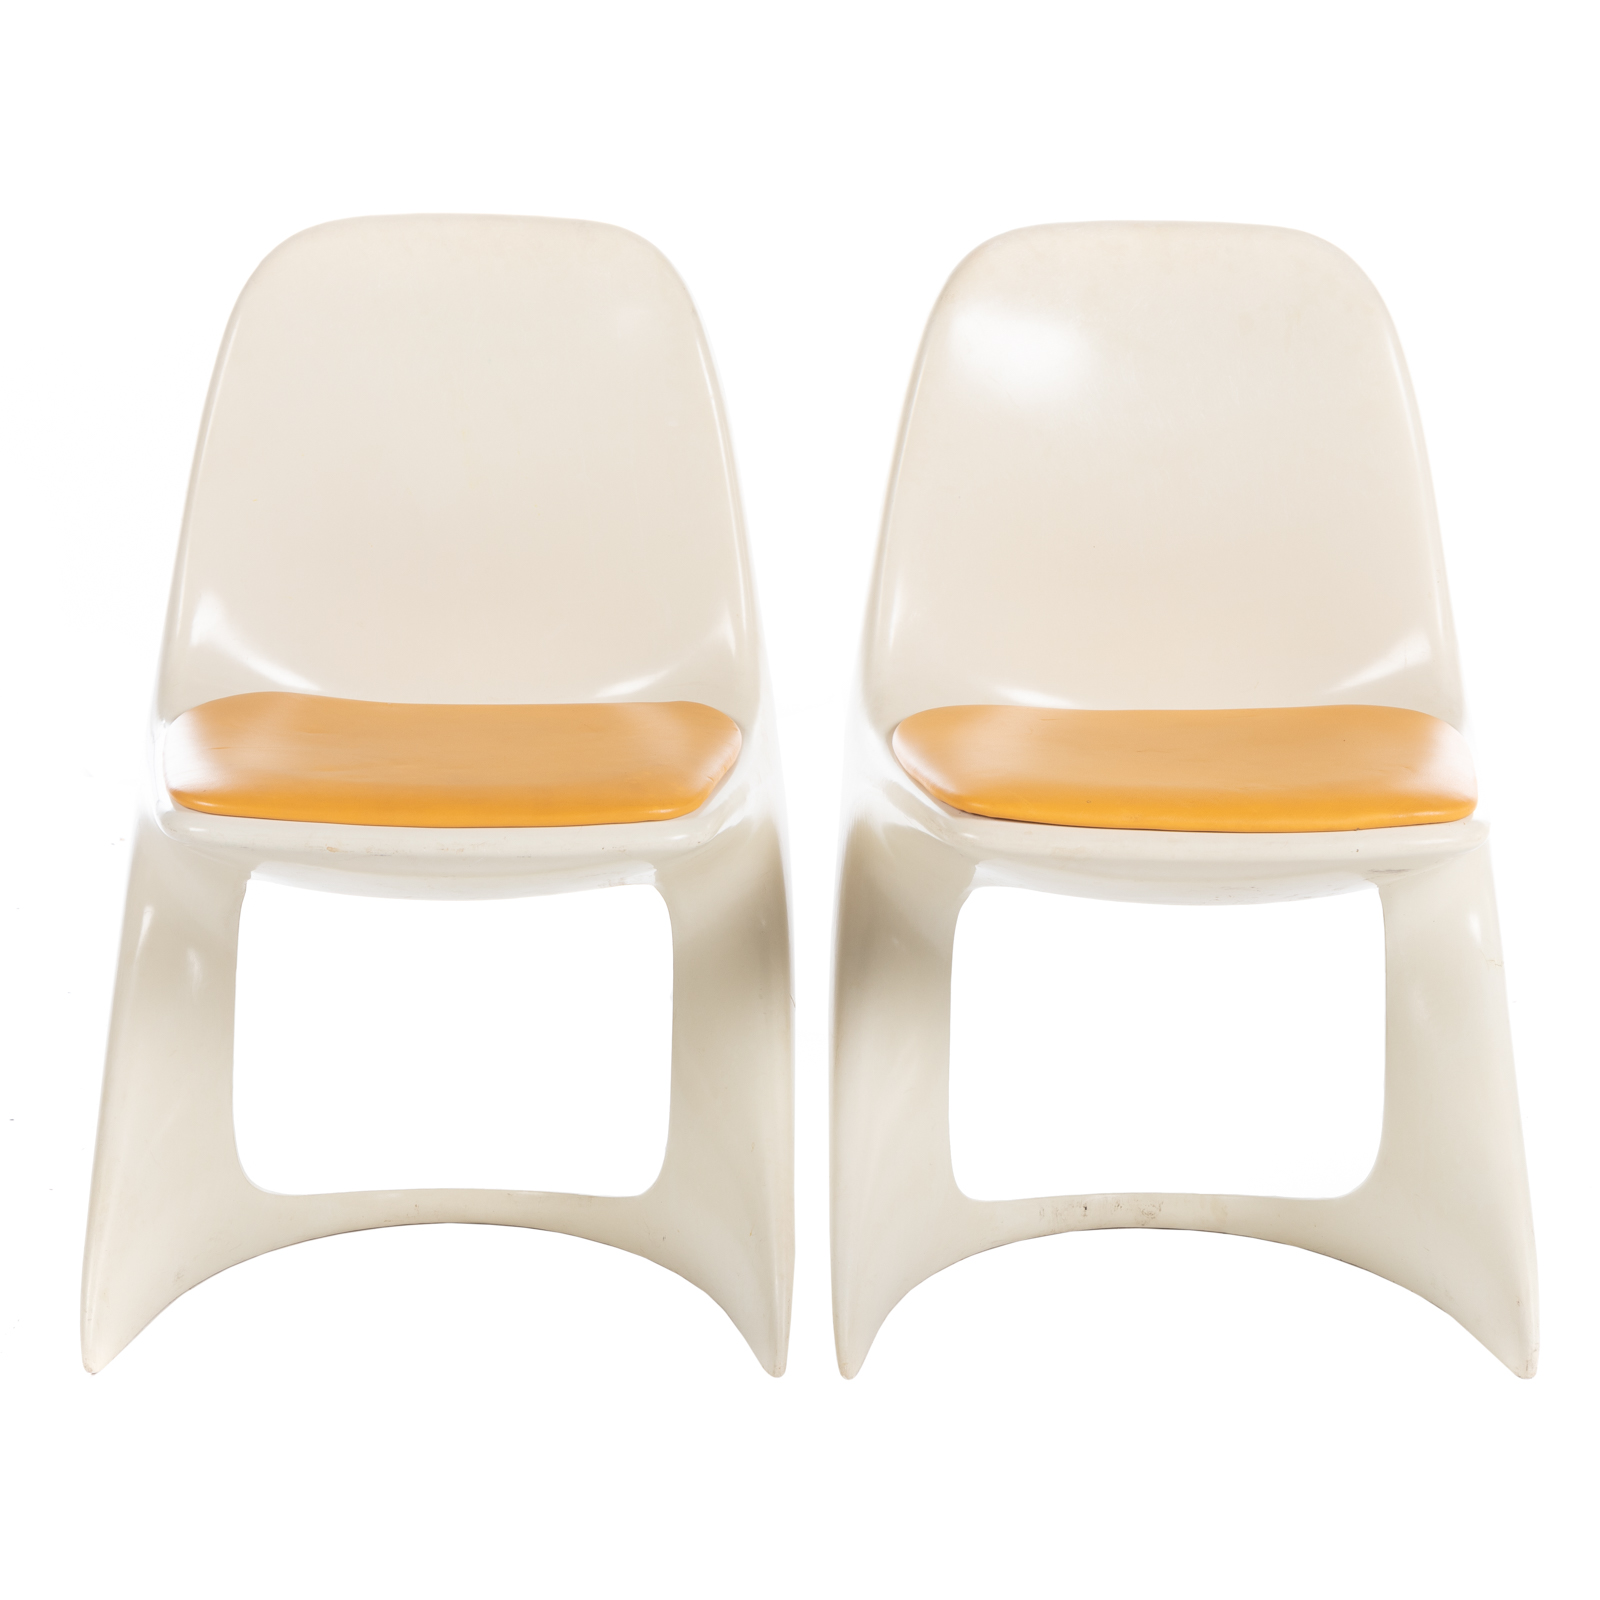 A PAIR OF MODERN CHAIRS BY ALEXANDER